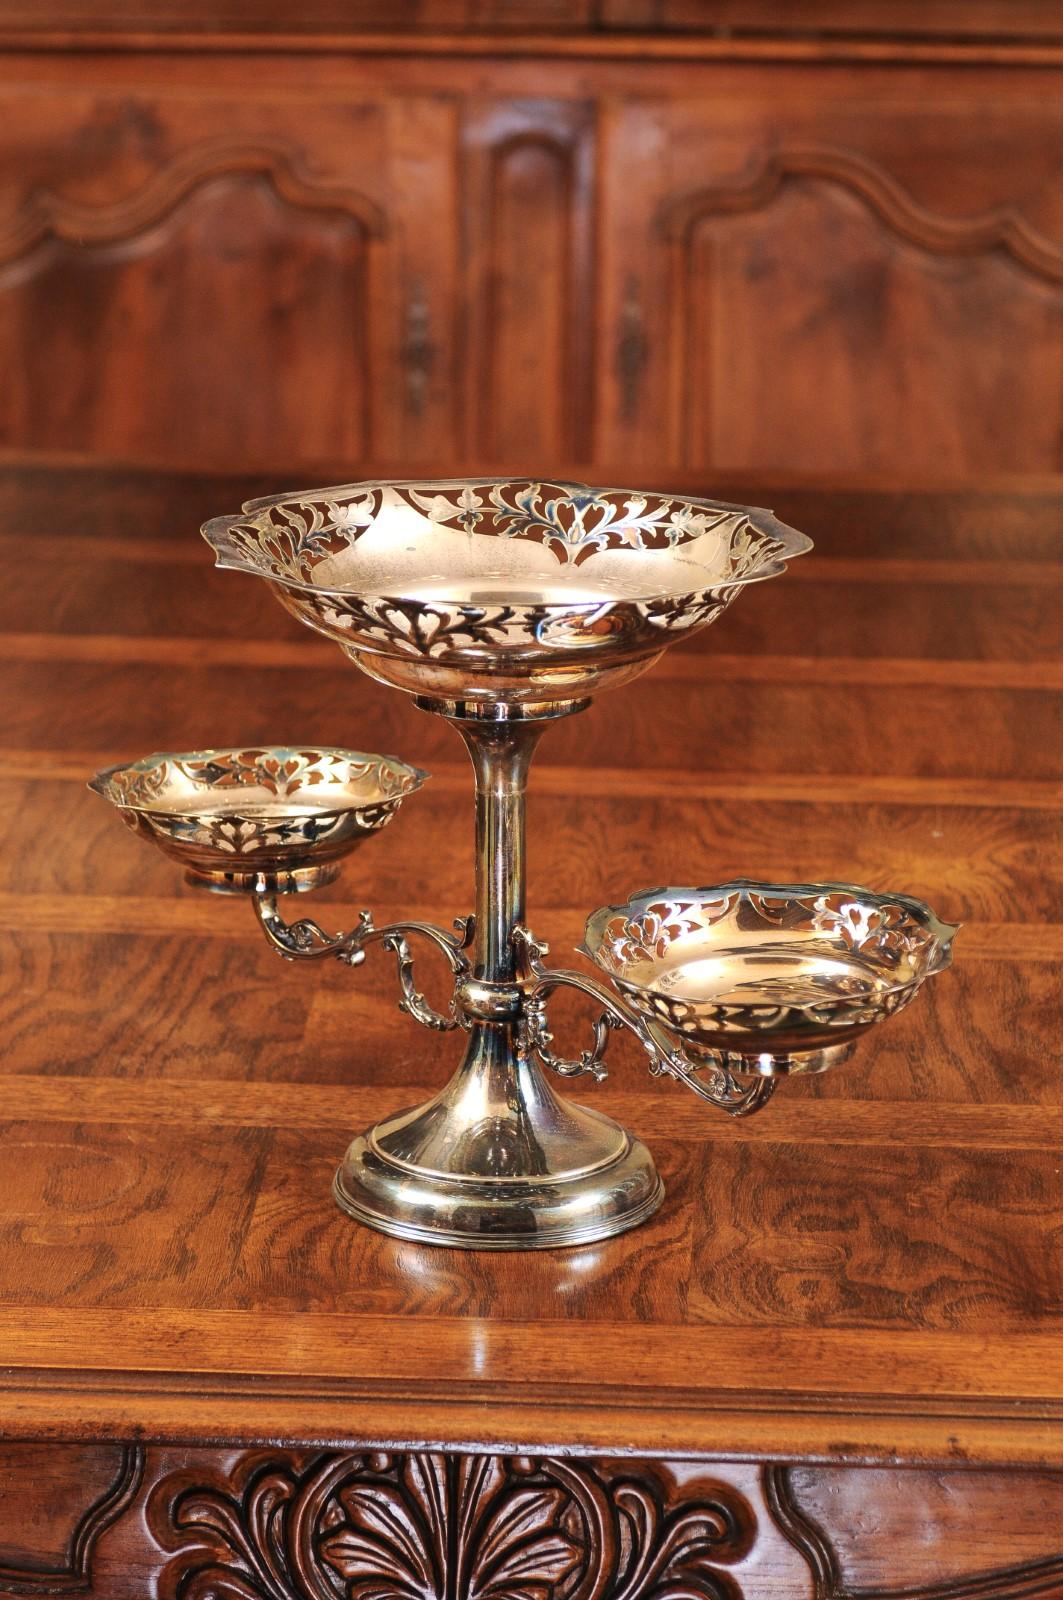 French 19th Century Silver Epergne with Pierced Foliage and Scrolling Motifs In Good Condition For Sale In Atlanta, GA